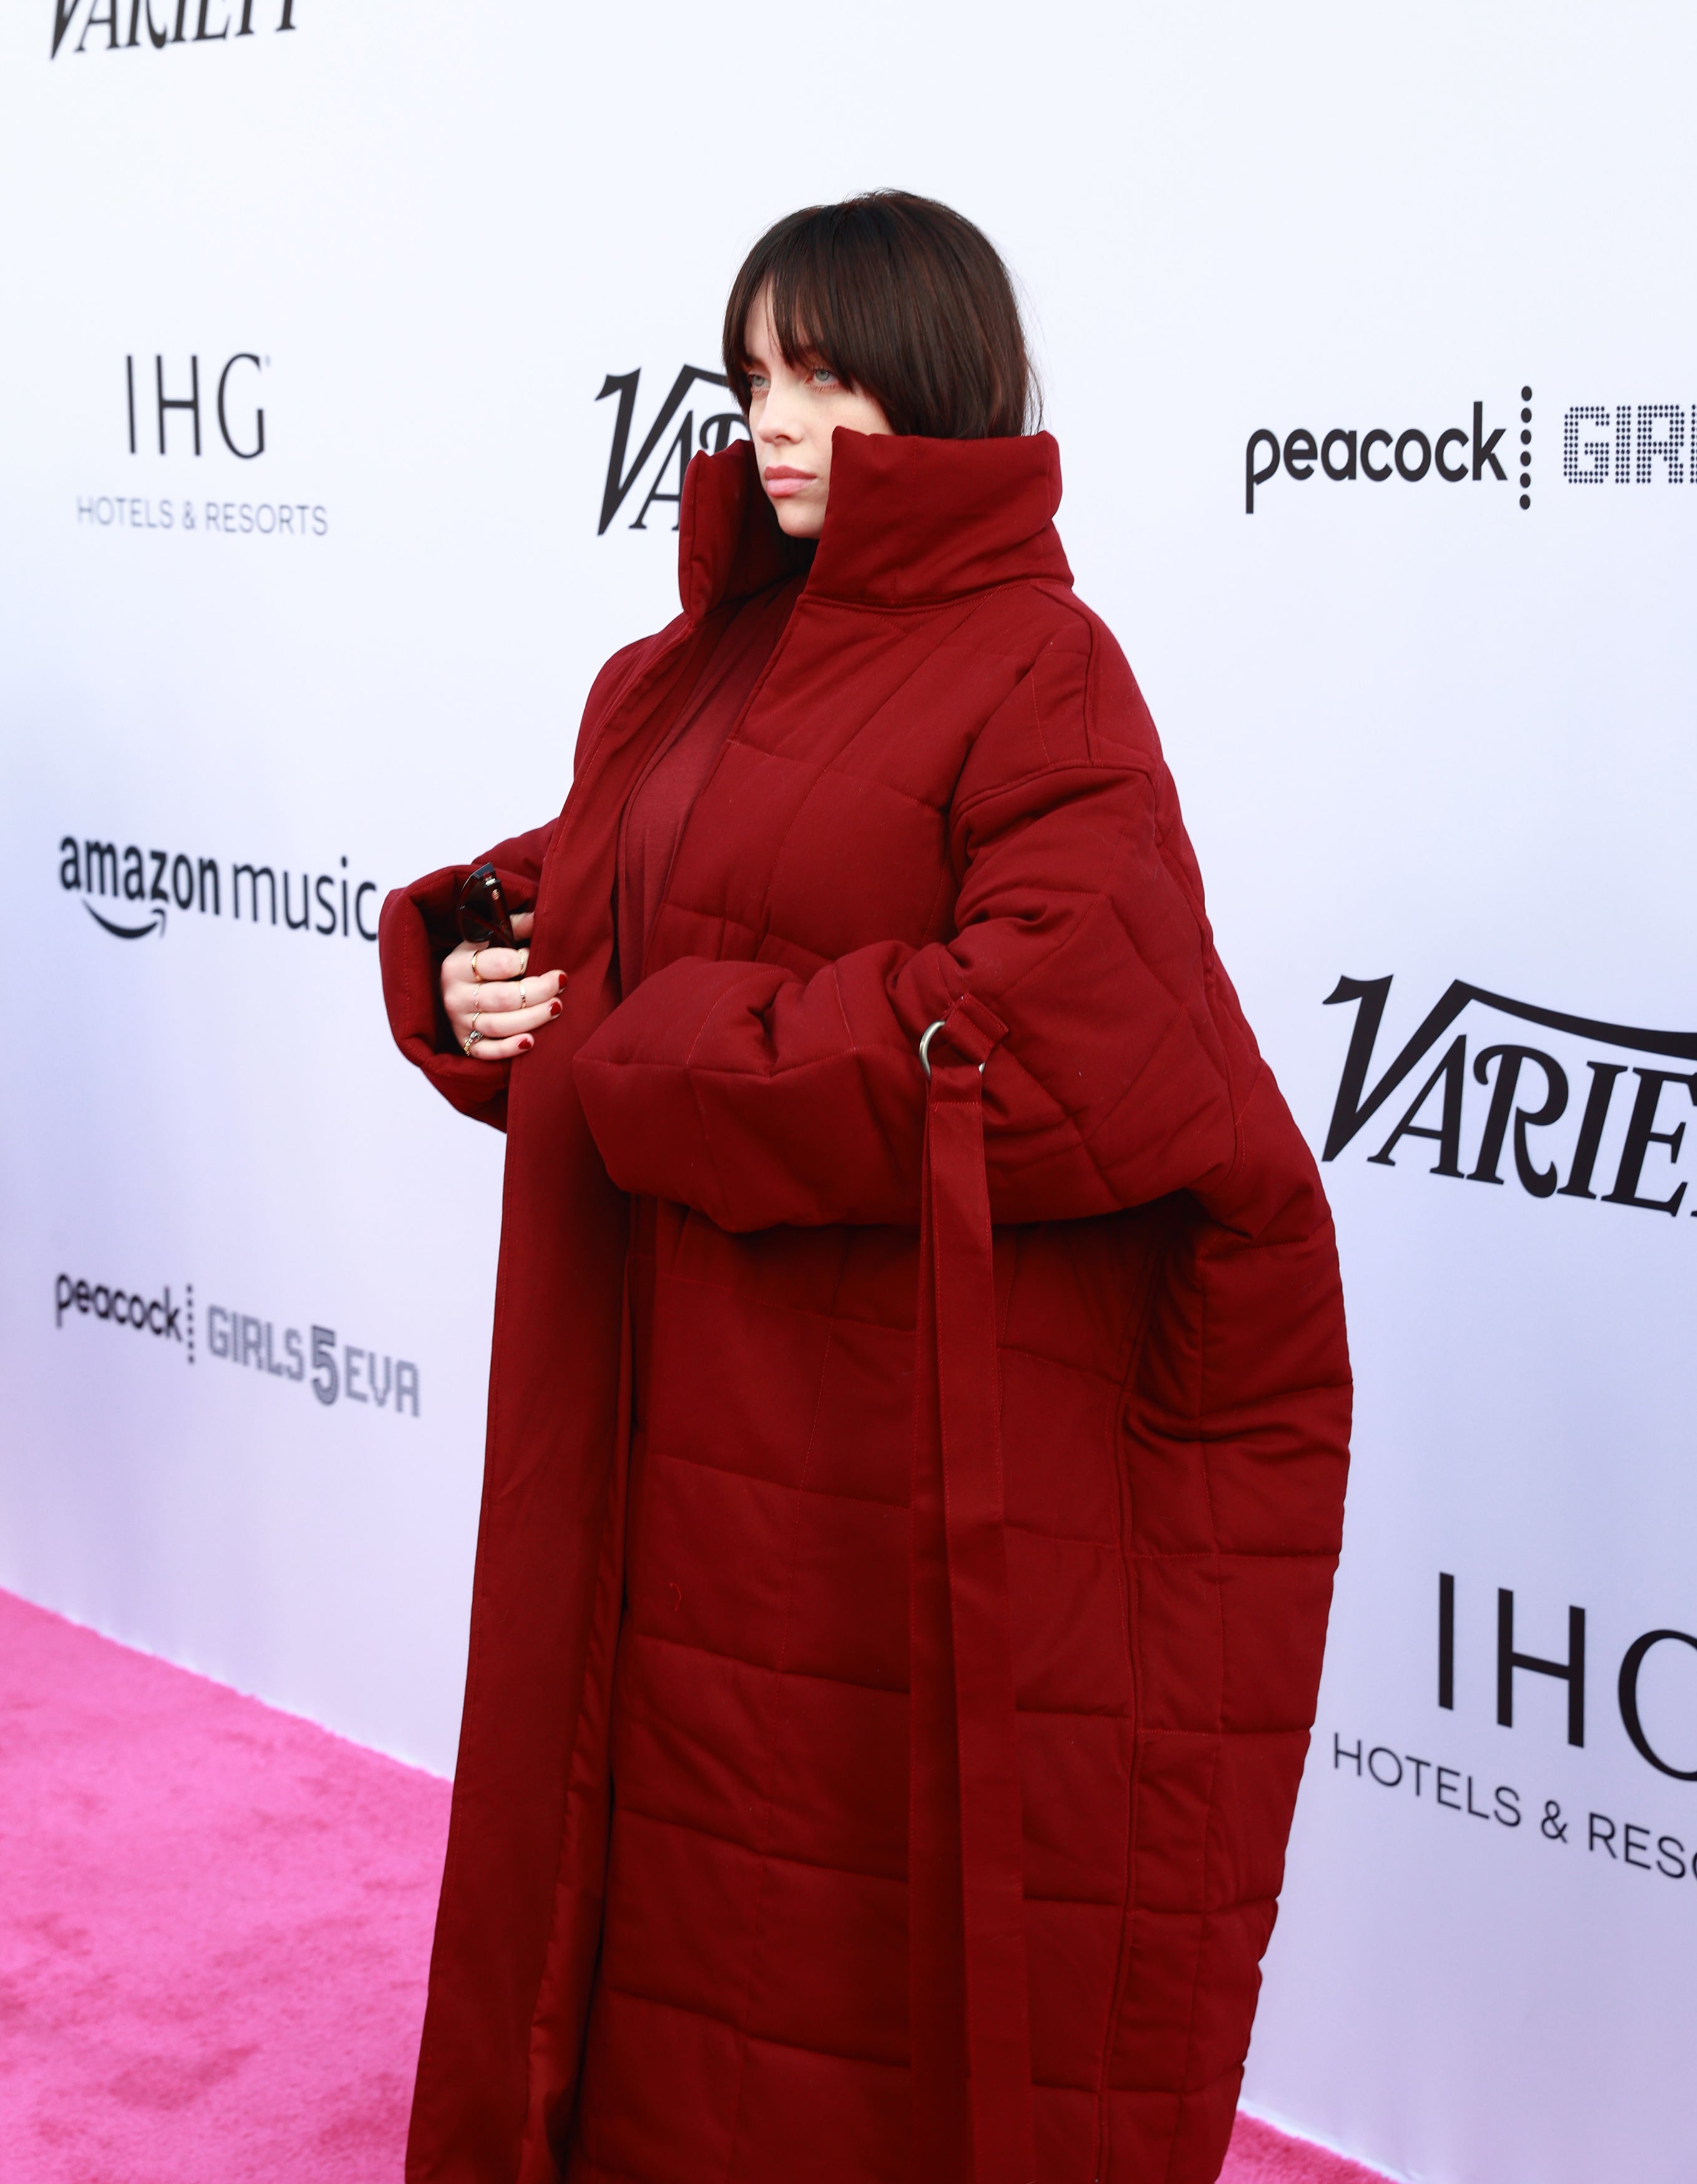 Billie on the red carpet wearing an oversized coat